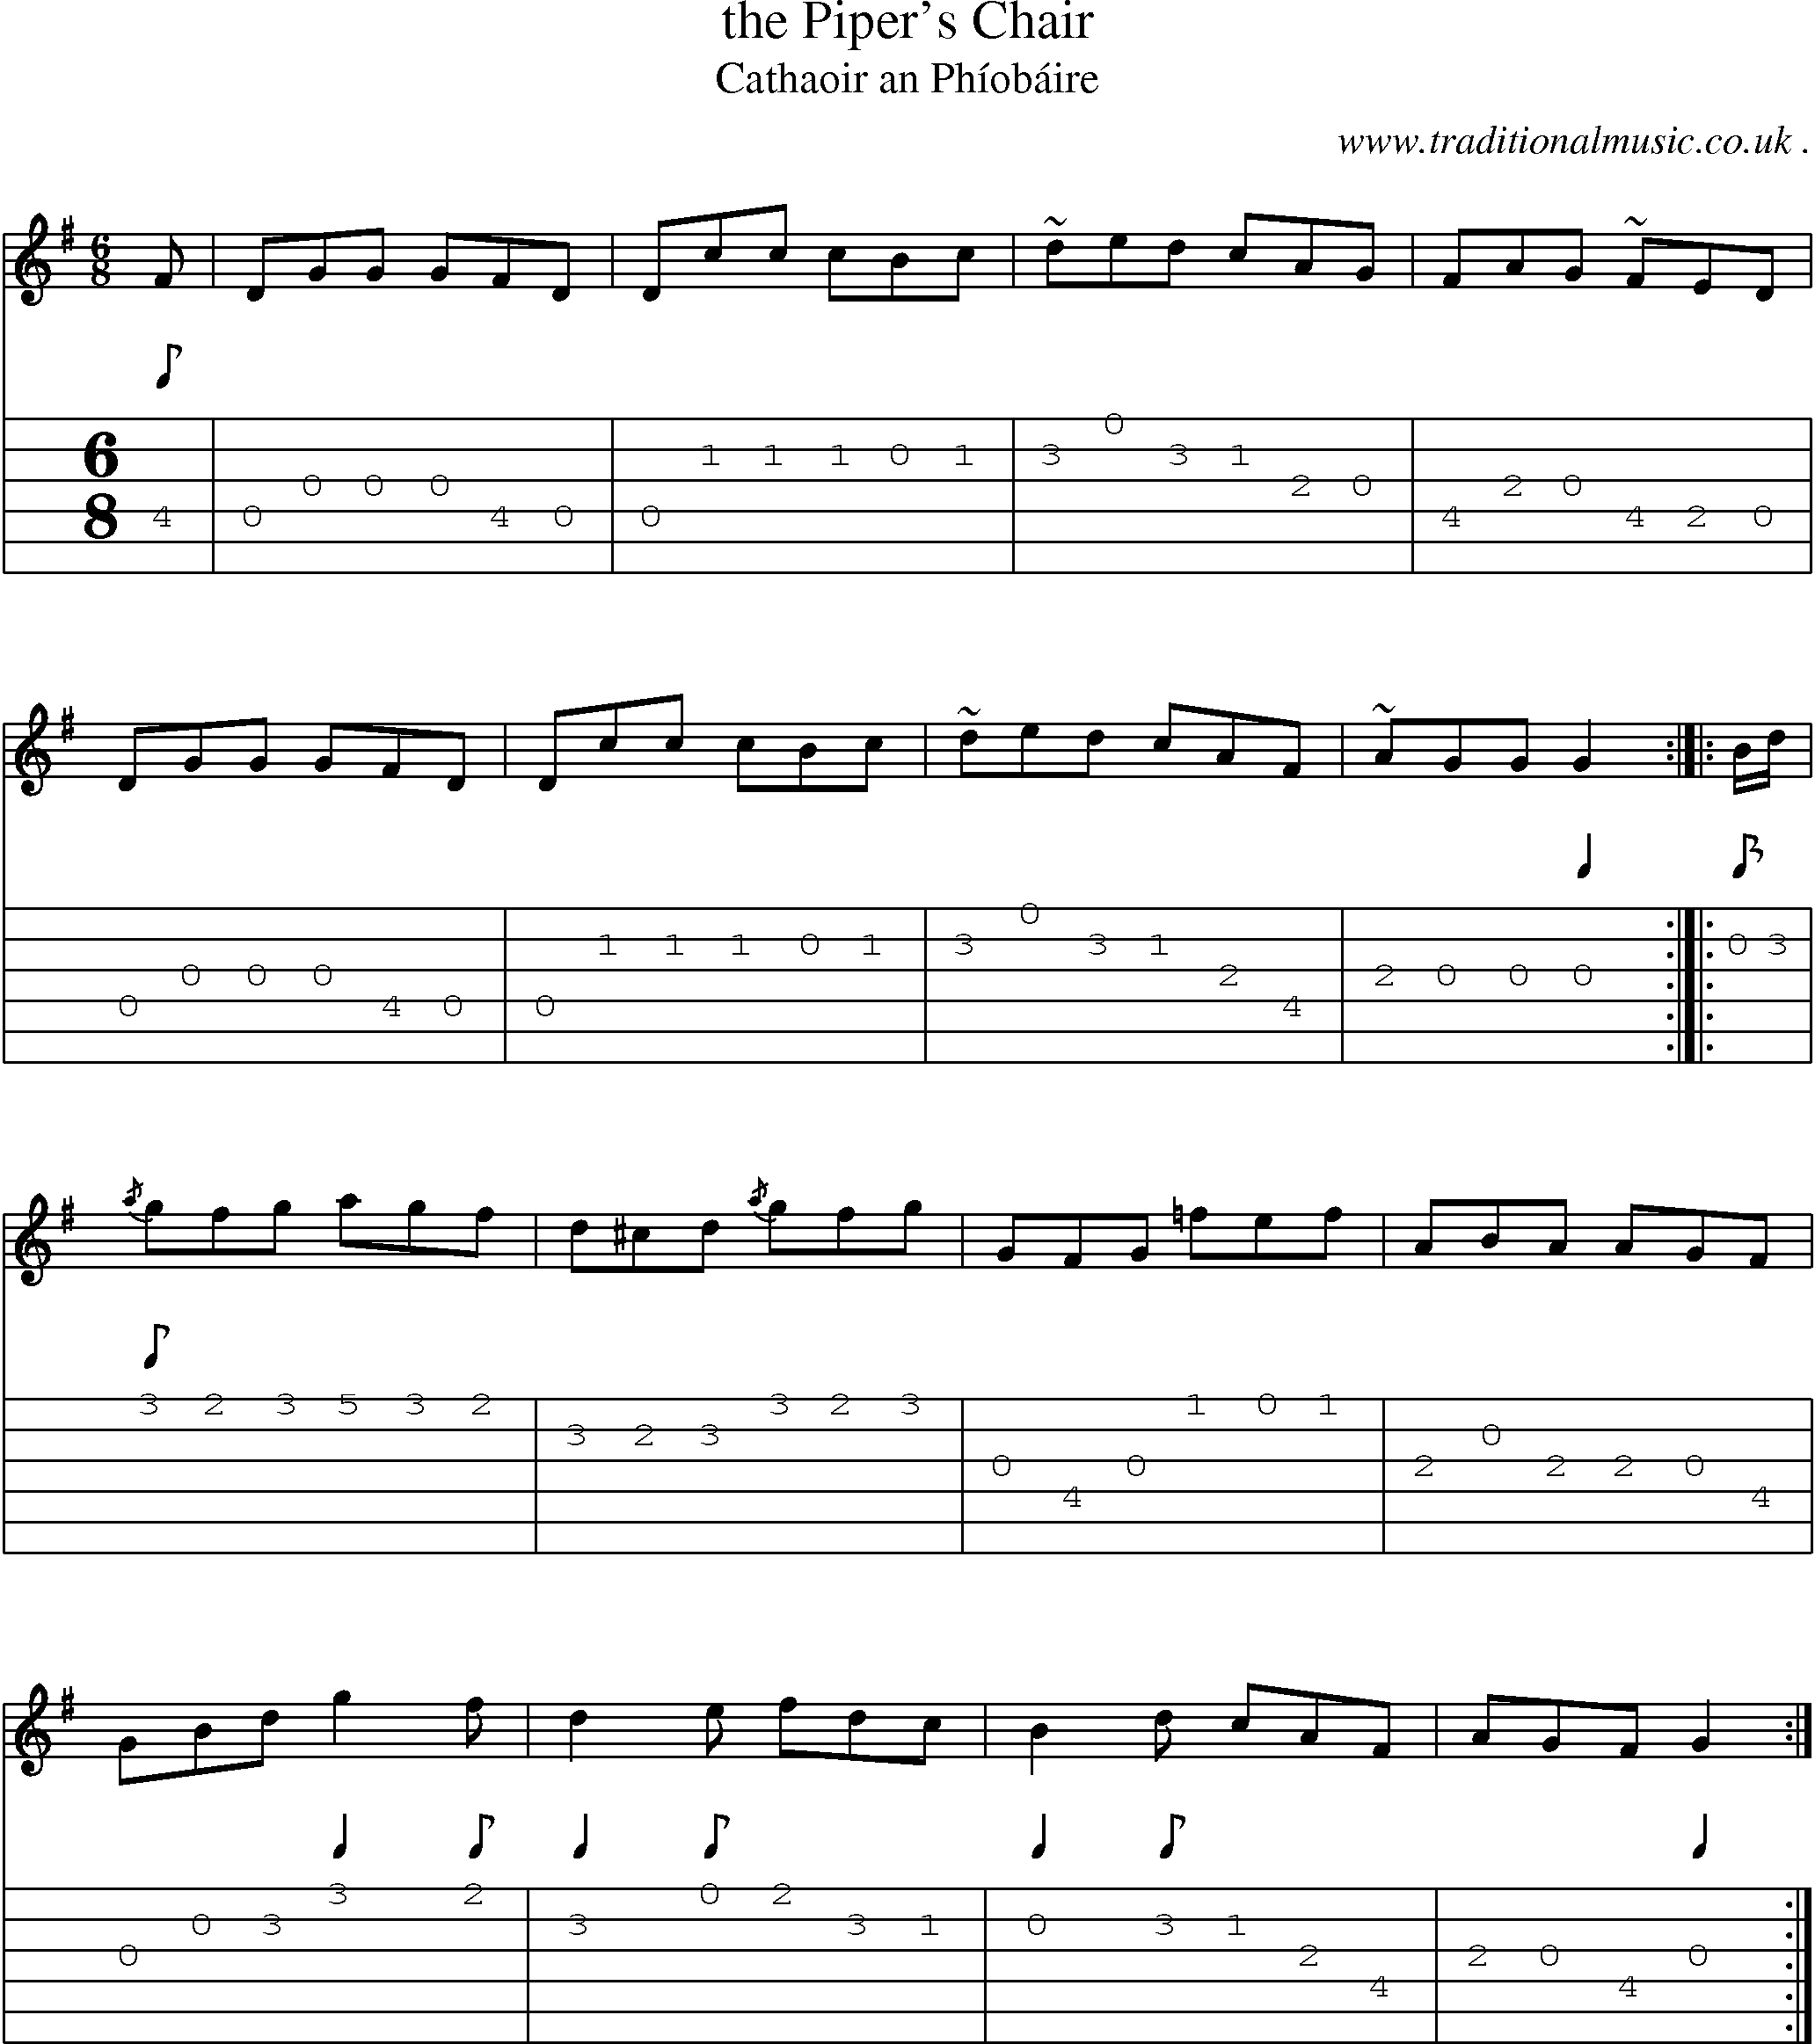 Sheet-music  score, Chords and Guitar Tabs for The Pipers Chair